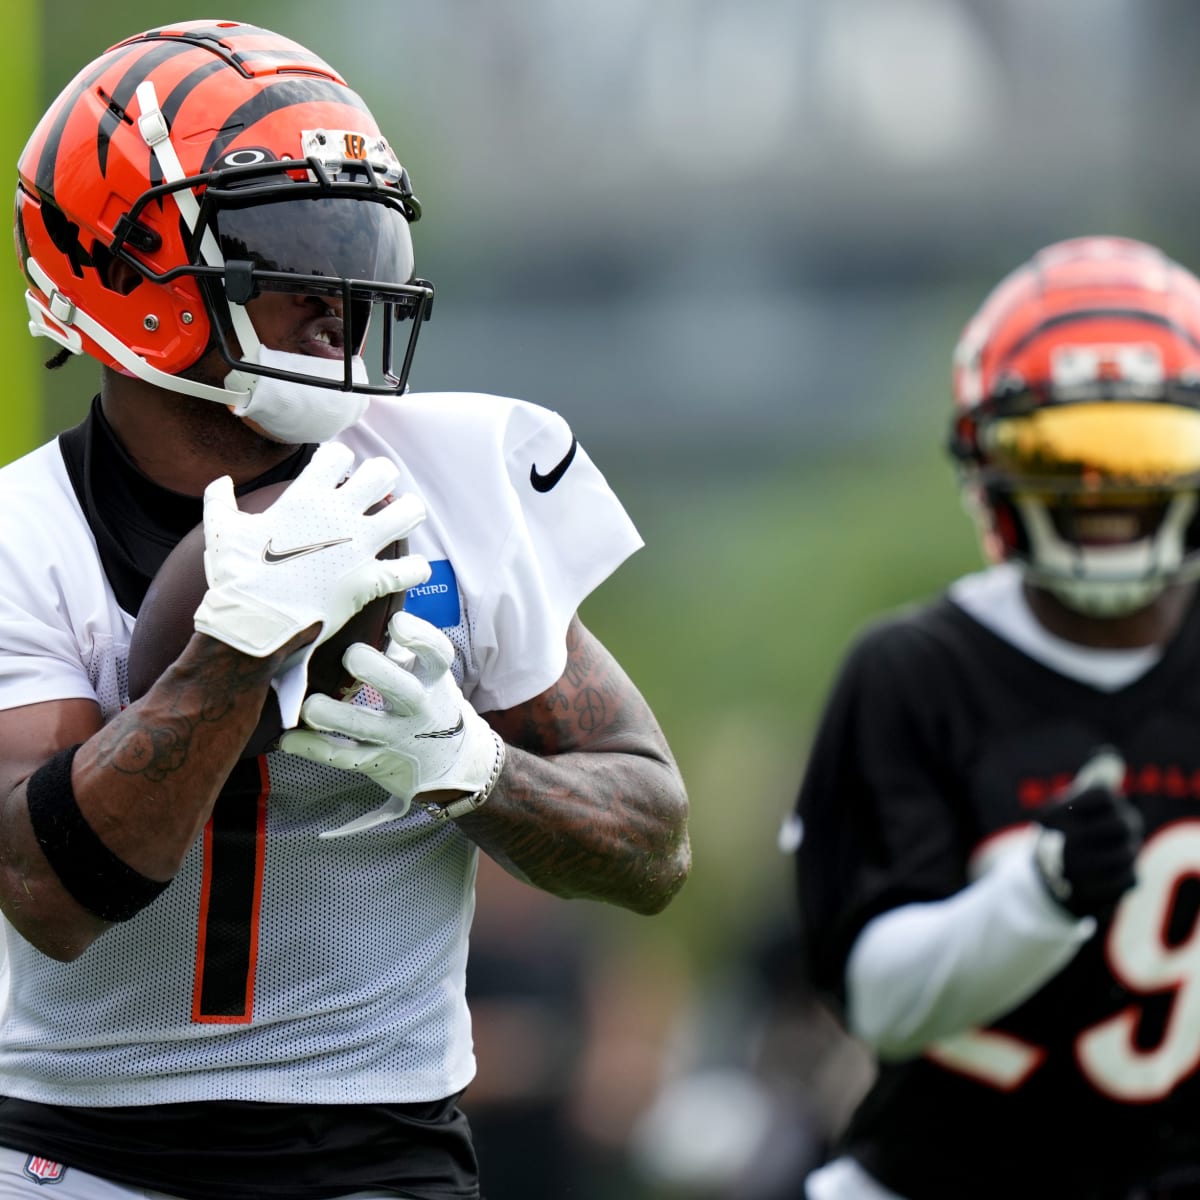 Bengals WR Ja'Marr Chase to get eased back into practice this week